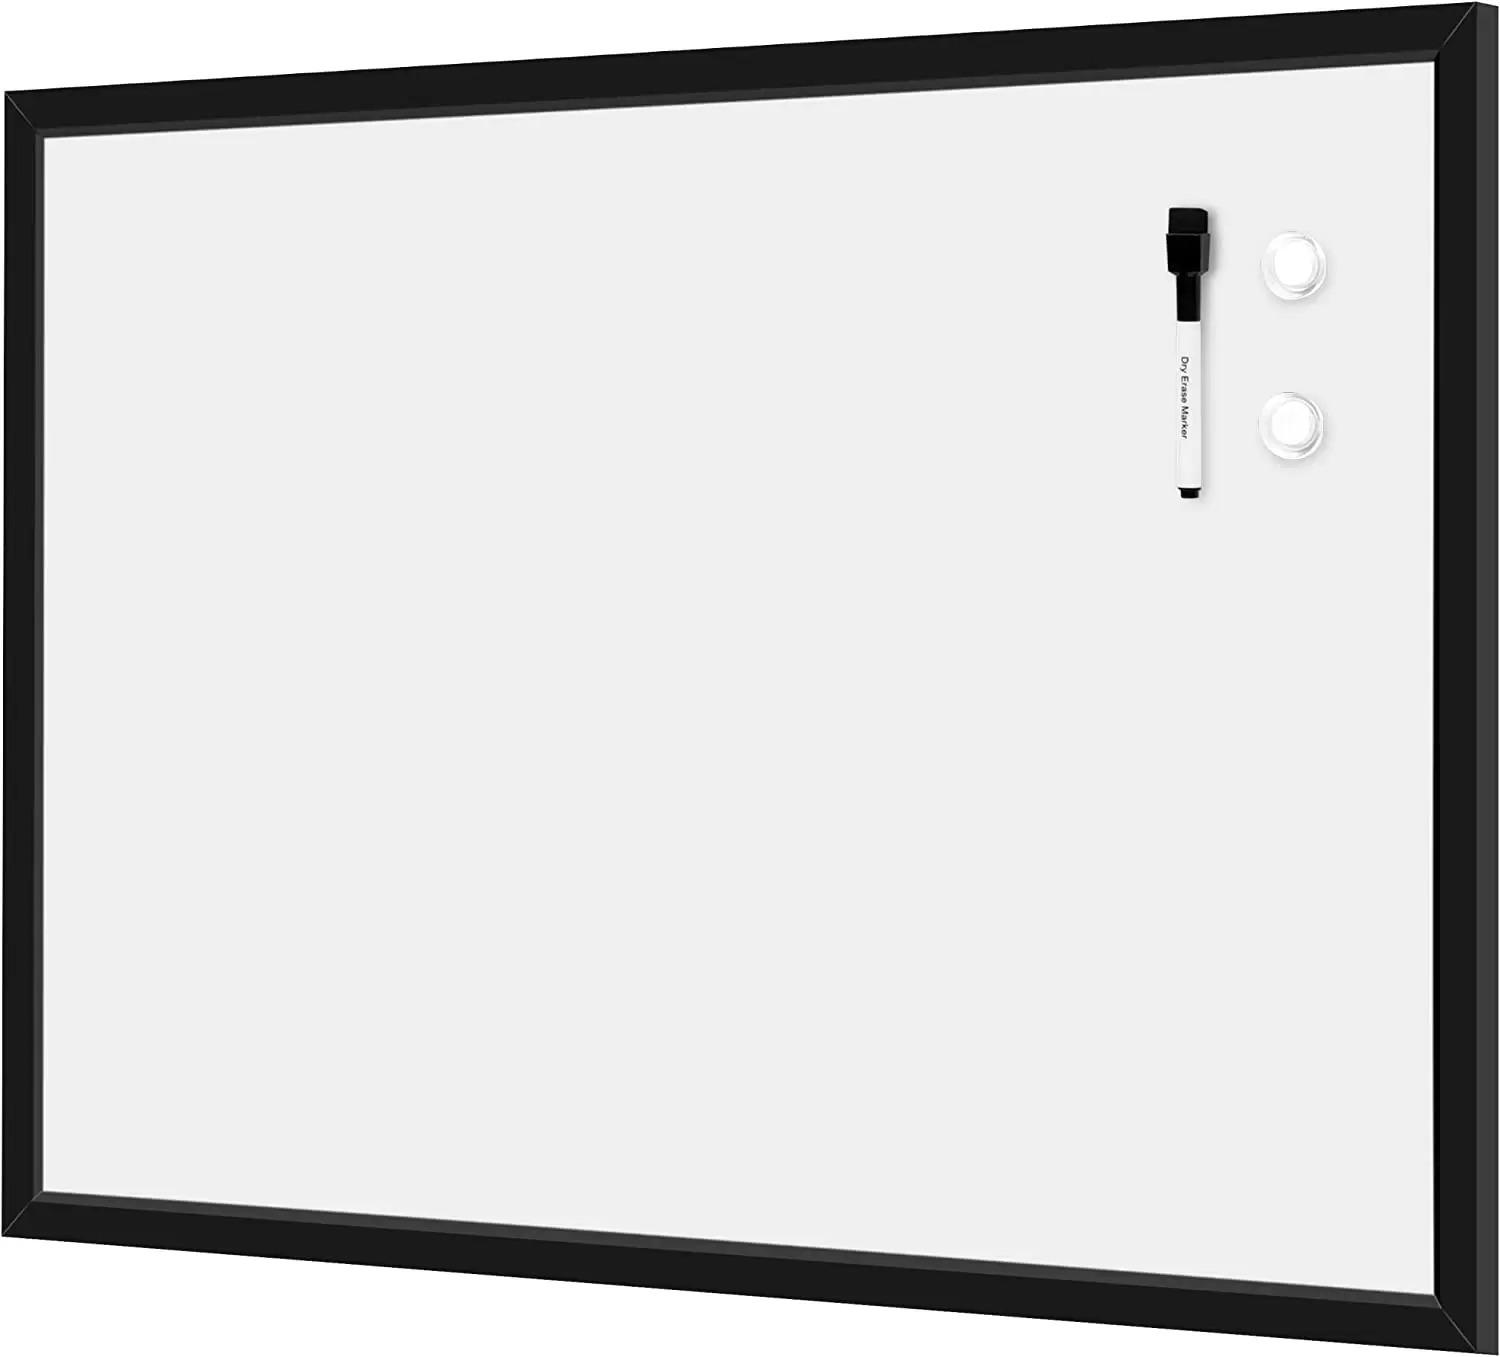 Amazon Basics 35in Magnetic Dry Erase White Board for $11.24